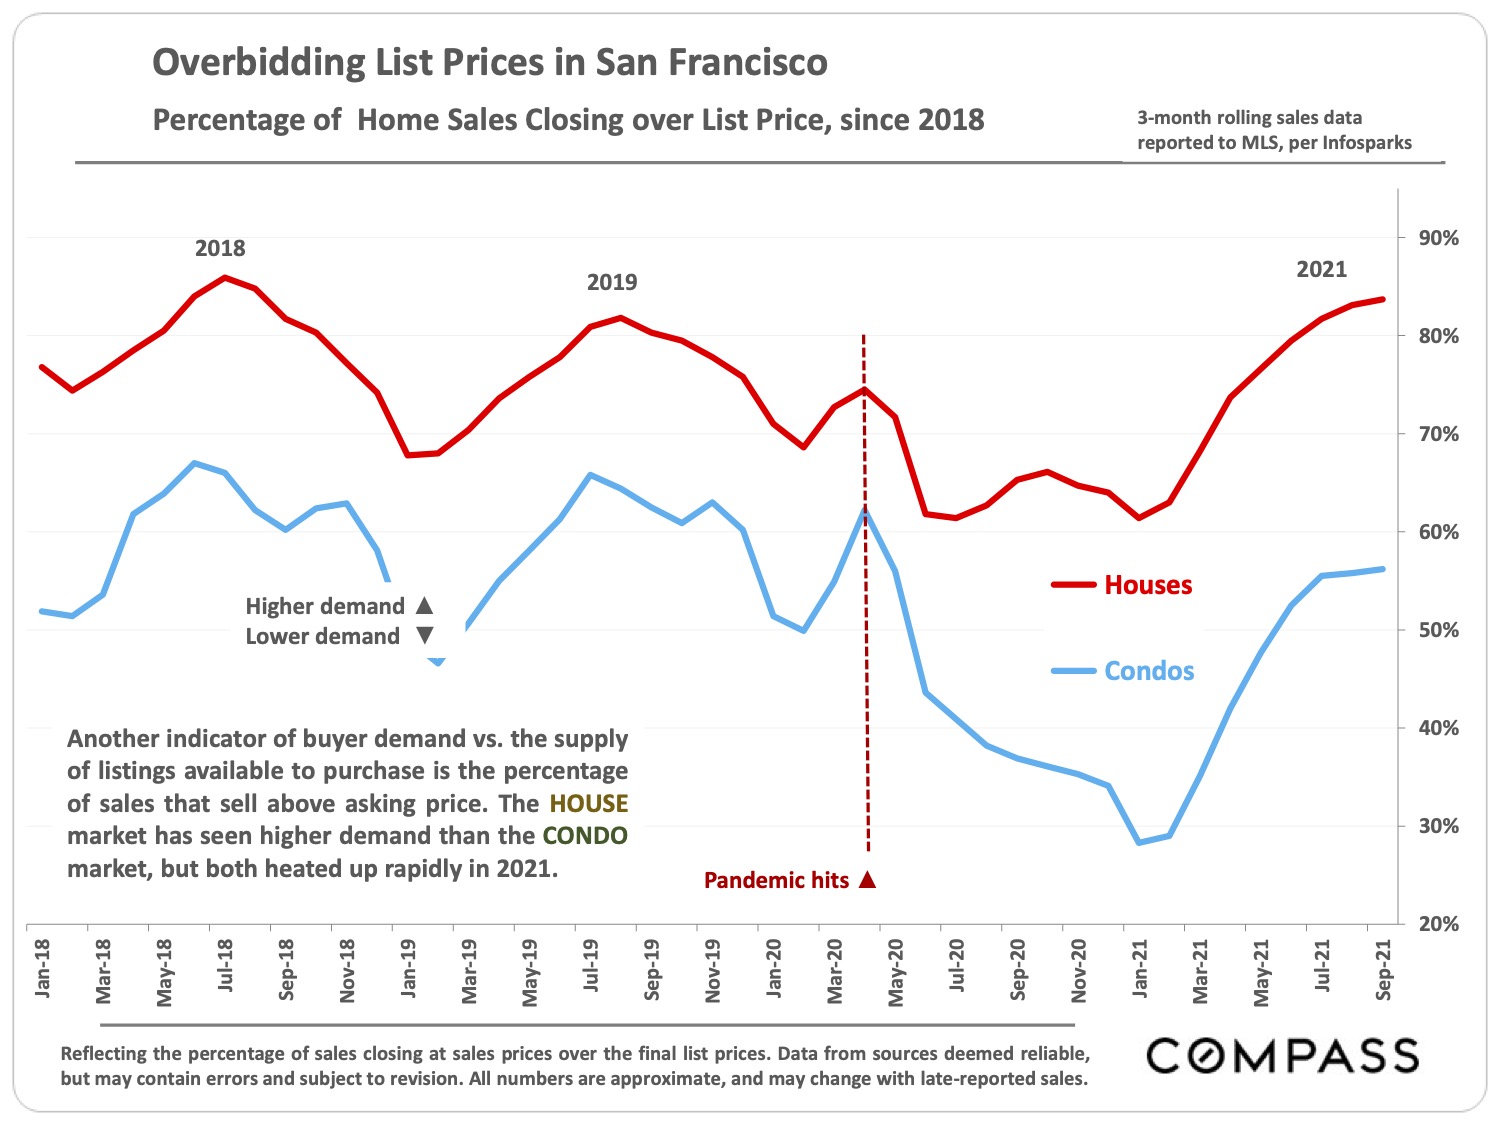 Overbidding List Prices in San Francisco - Percentage of Home Sales Closing Over List Price, Since 2018